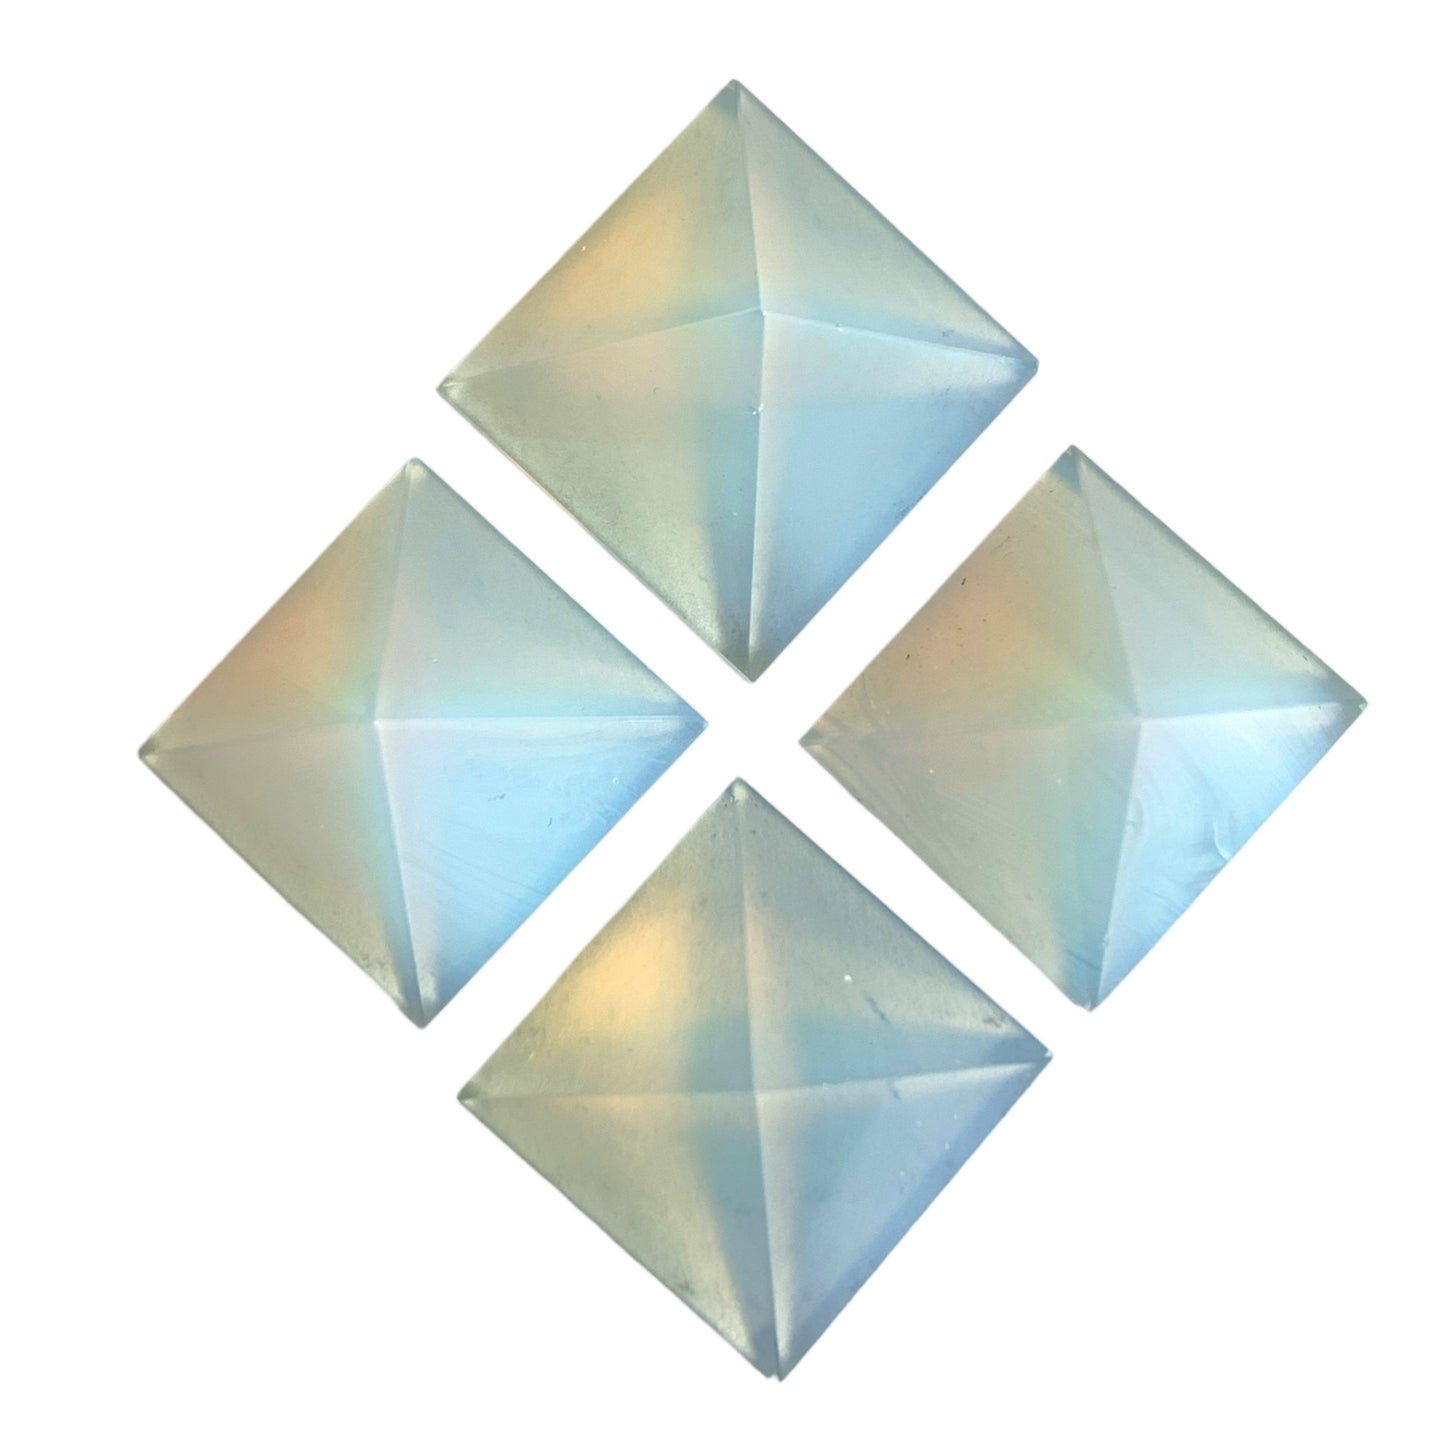 Opalite - Small Pyramids - 23 to 28mm - Price per piece 15g - Order in 5's - NEW121